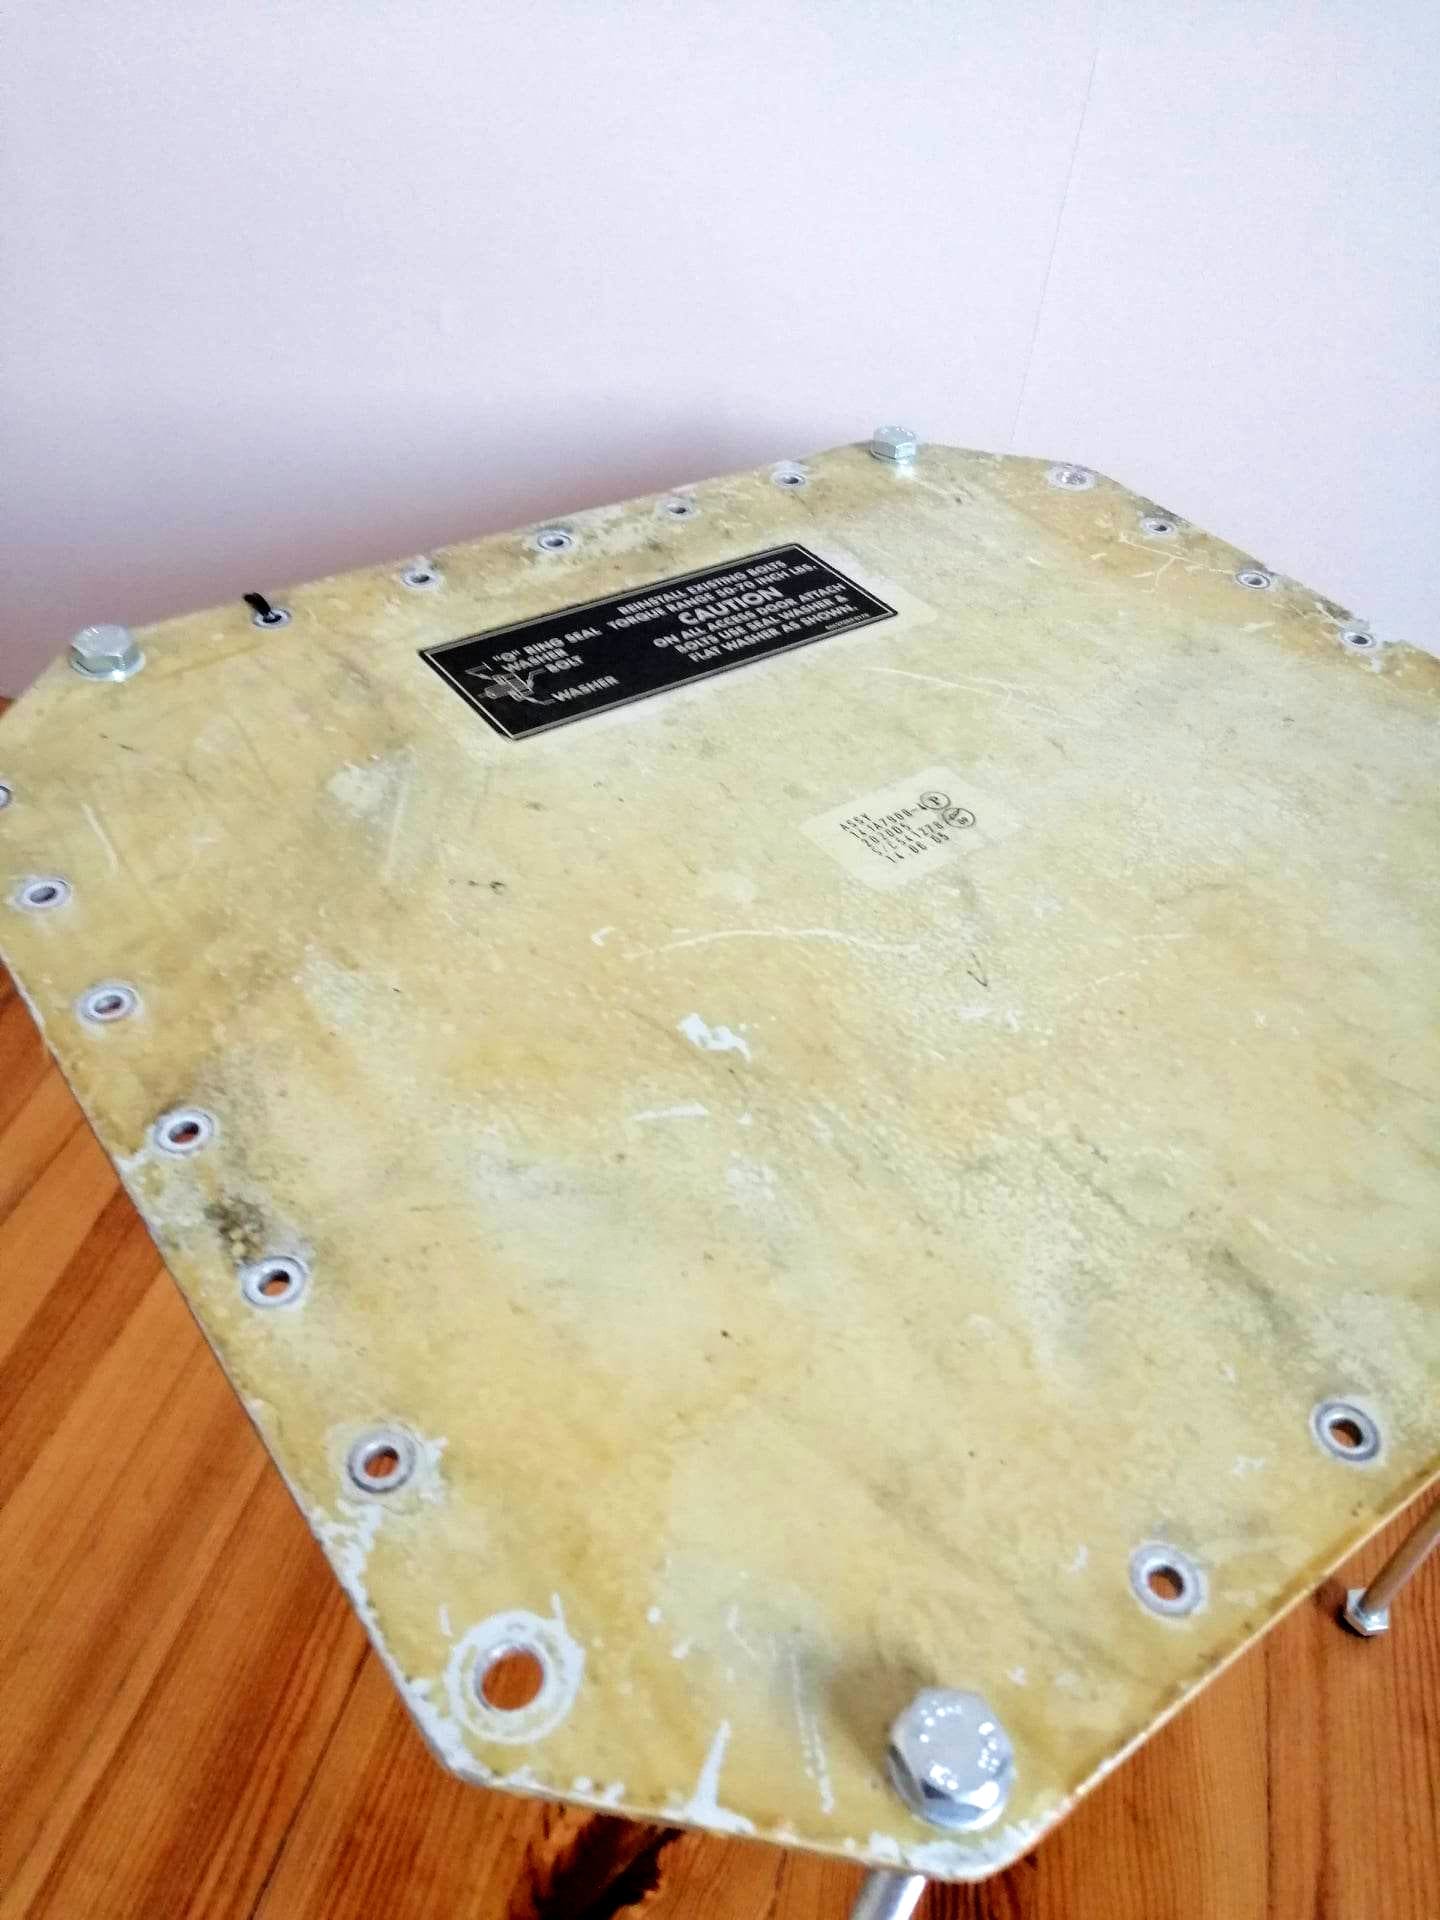 Aviation Side Table, Aircraft Coffee Table Made of Original Boeing 737 Access Panel Door - Airplane Parts